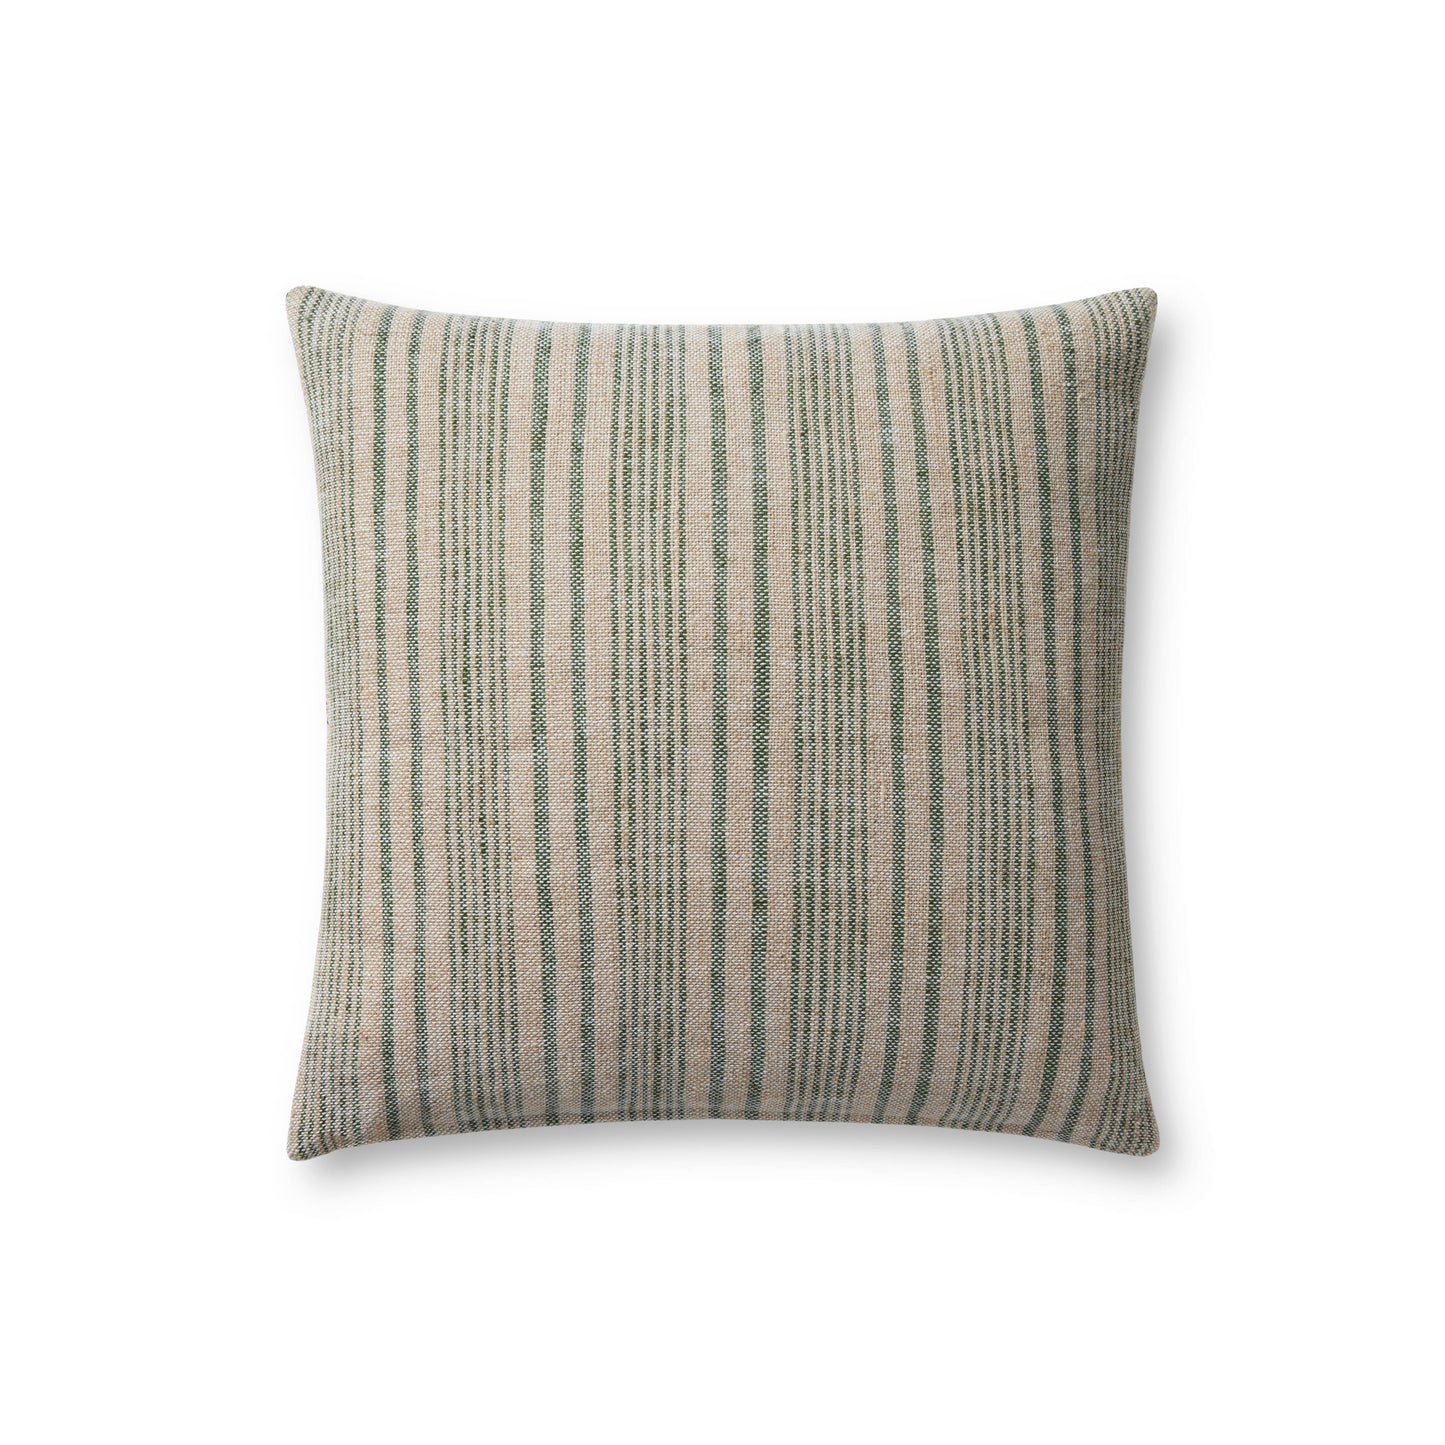 Elaine PMH0032 Jute Indoor Pillow from Magnolia Home by Joanna Gaines x Loloi